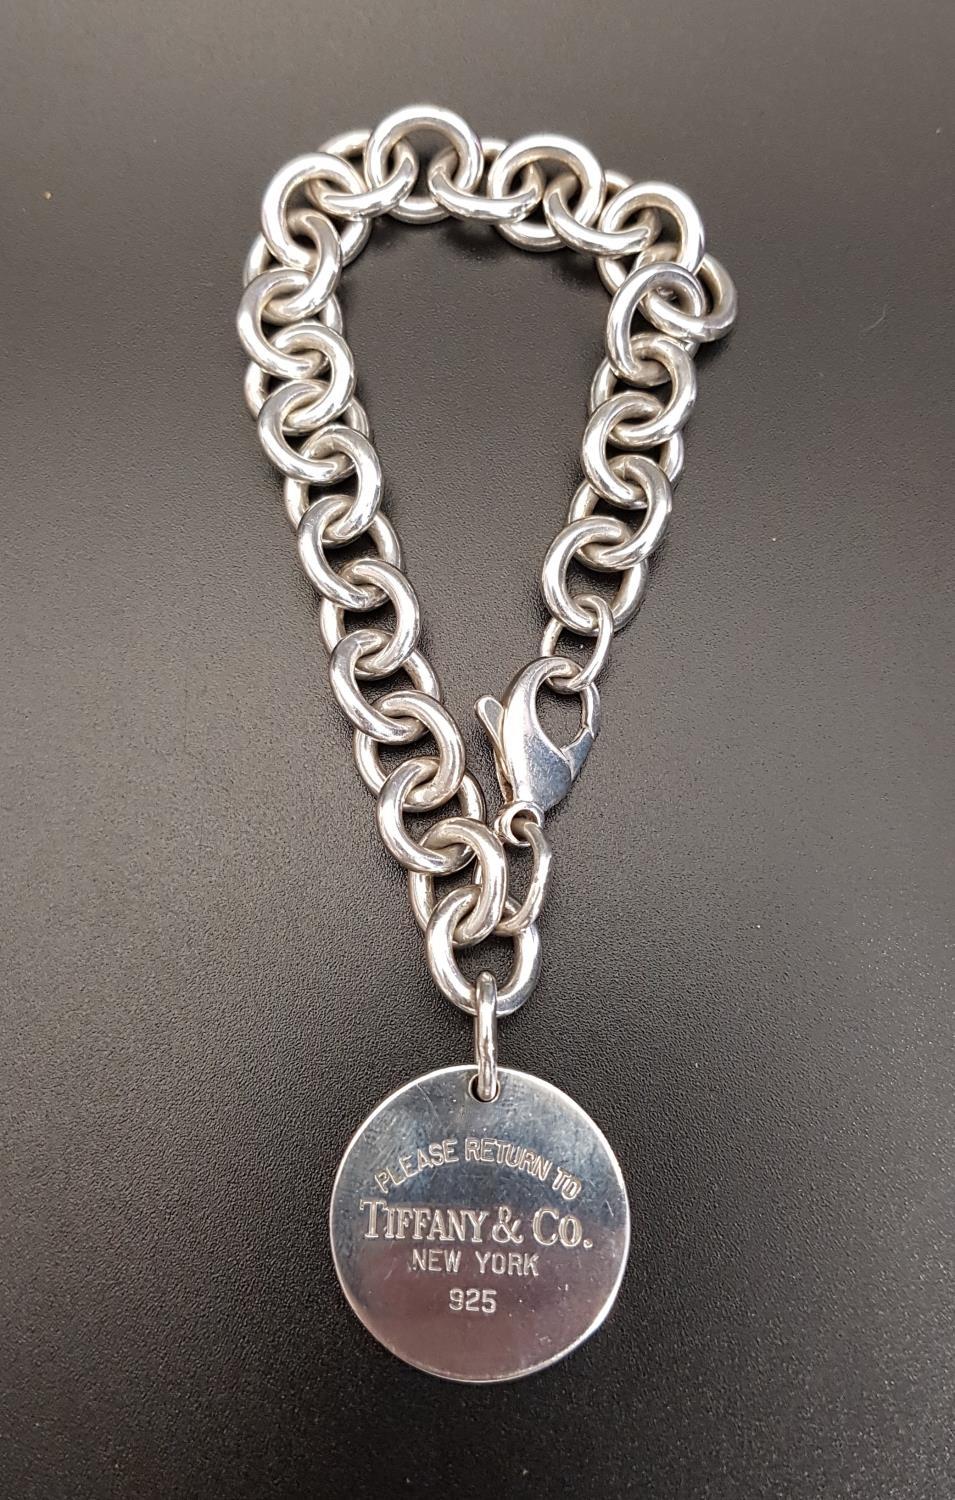 TIFFANY & CO SILVER ROUND TAG BRACELET the belcher link bracelet with round tag reading 'Please